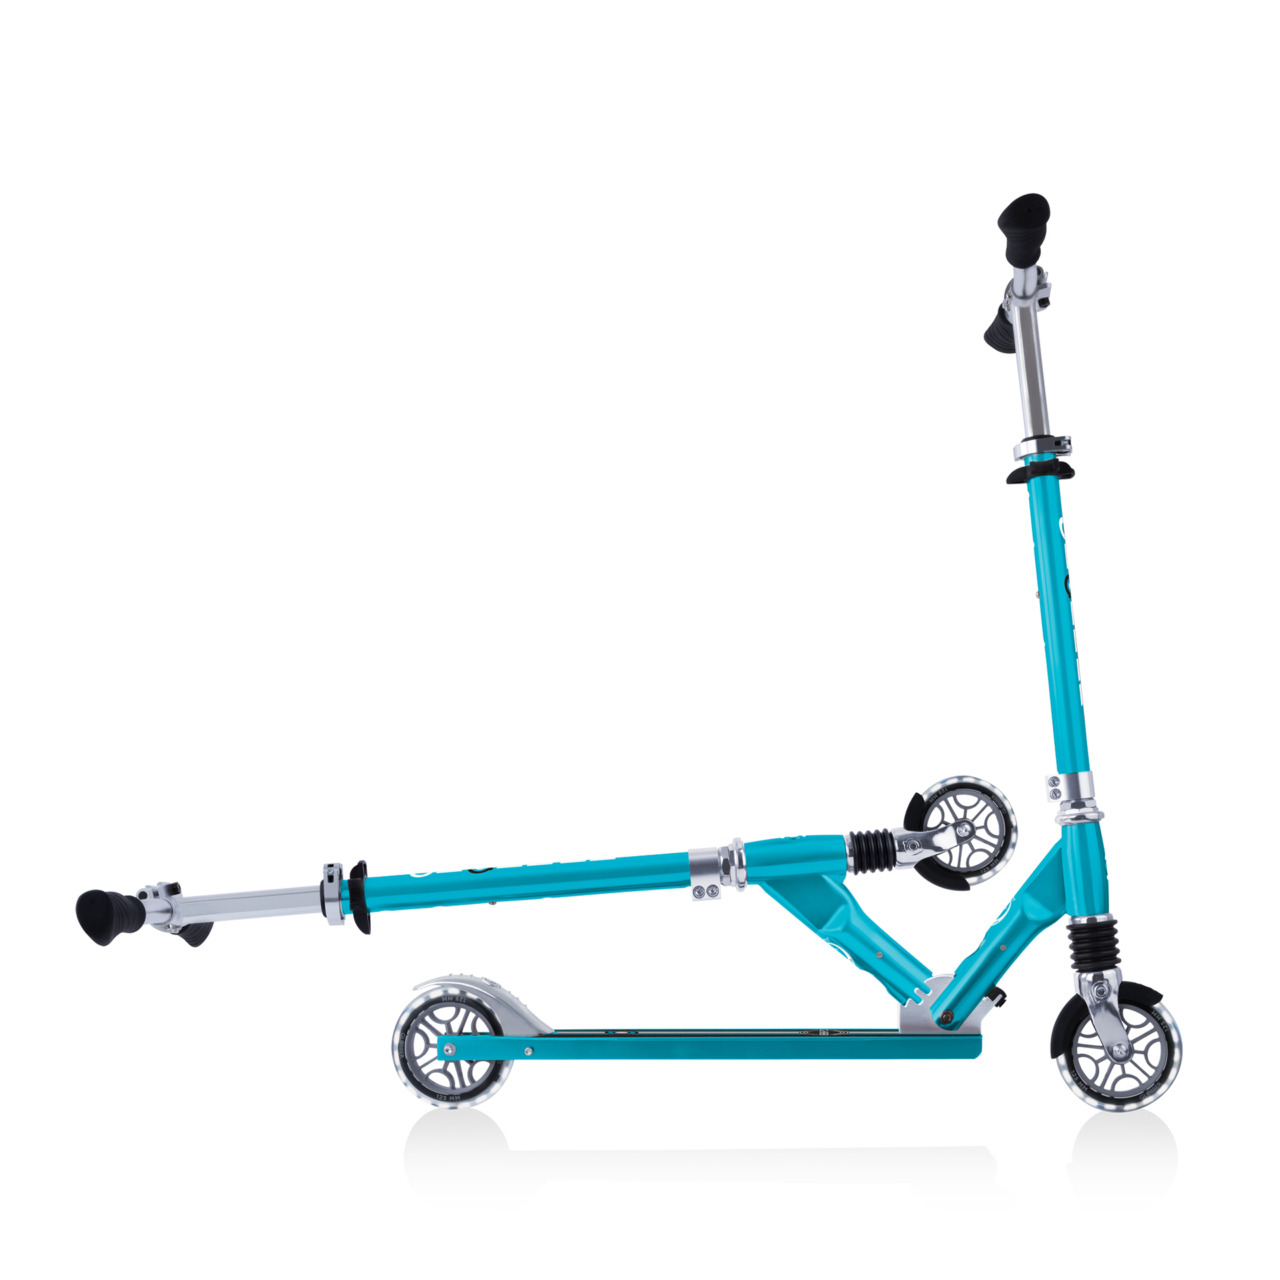 727 301 Fold Up Scooter With Flashing Wheels